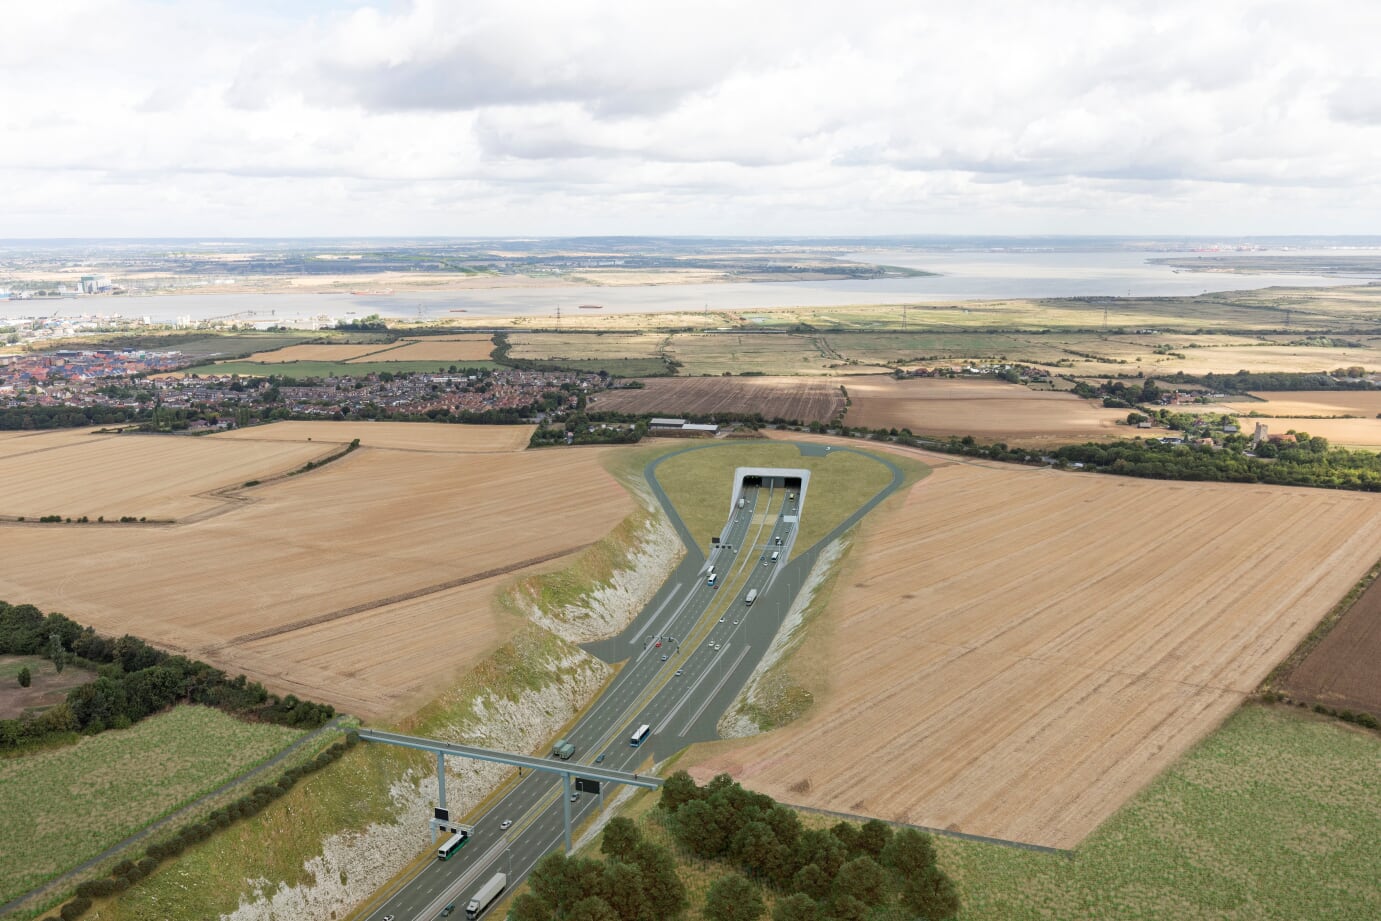 How the southern portal of the Lower Thames Crossing, in Kent, will look